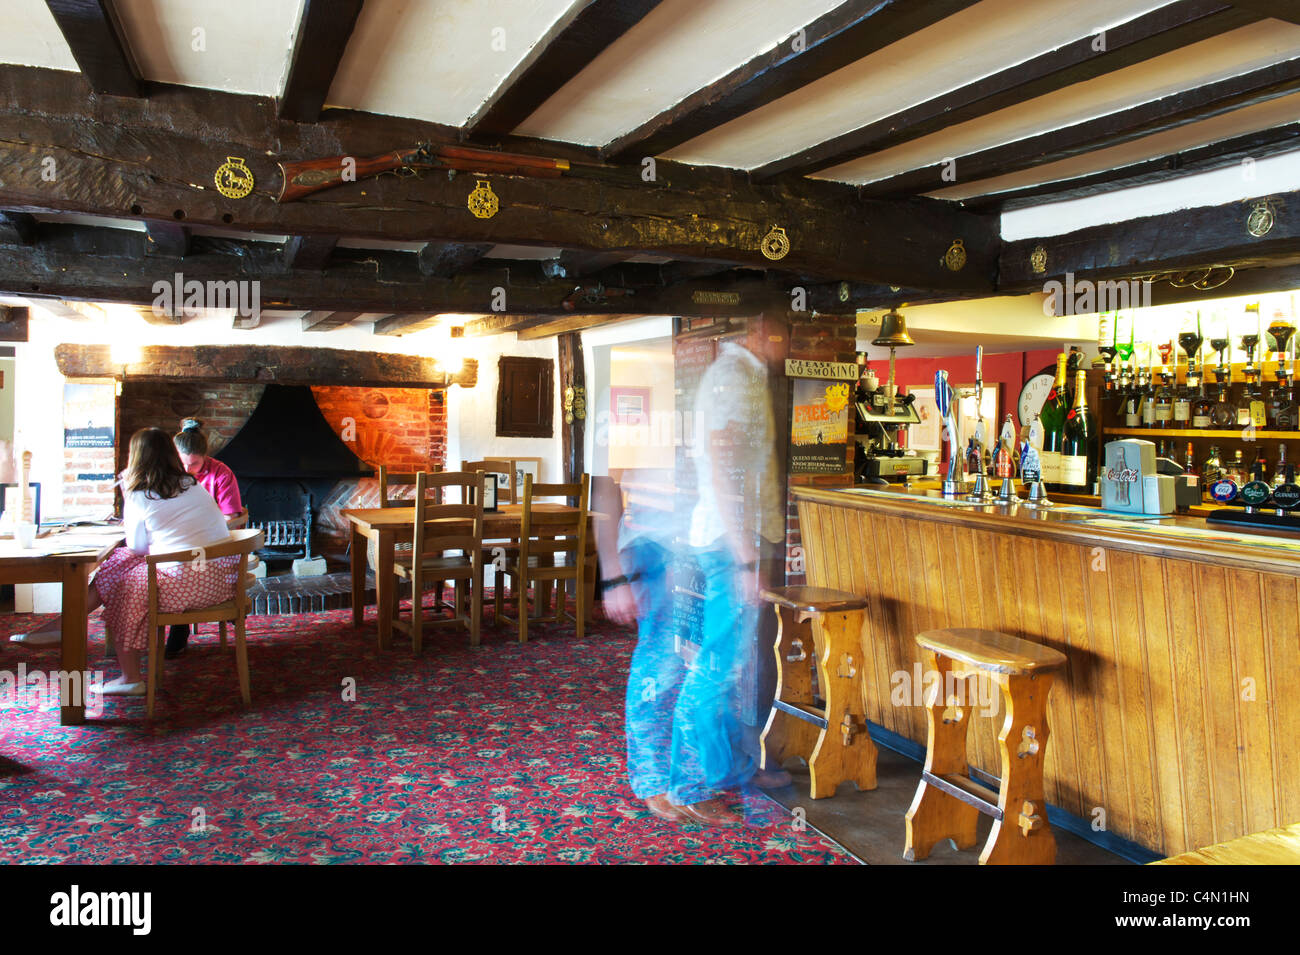 inside a typical Village Pub, with customers blurred by movement standing at the bar Stock Photo